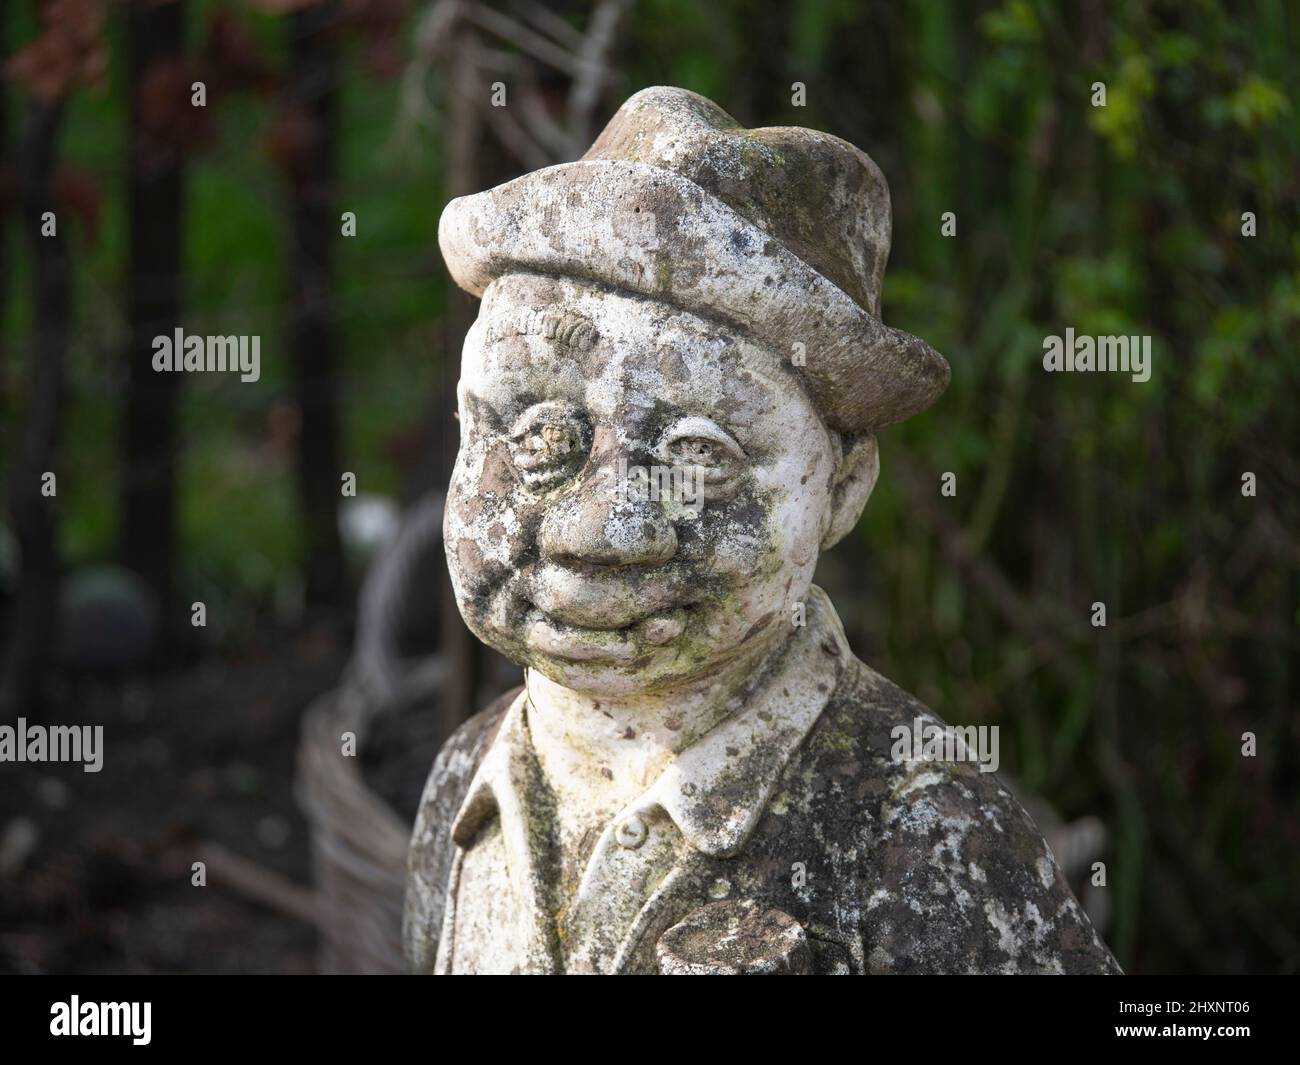 Close up photo of a hard weathered concrete statue, man in suit with hat Stock Photo